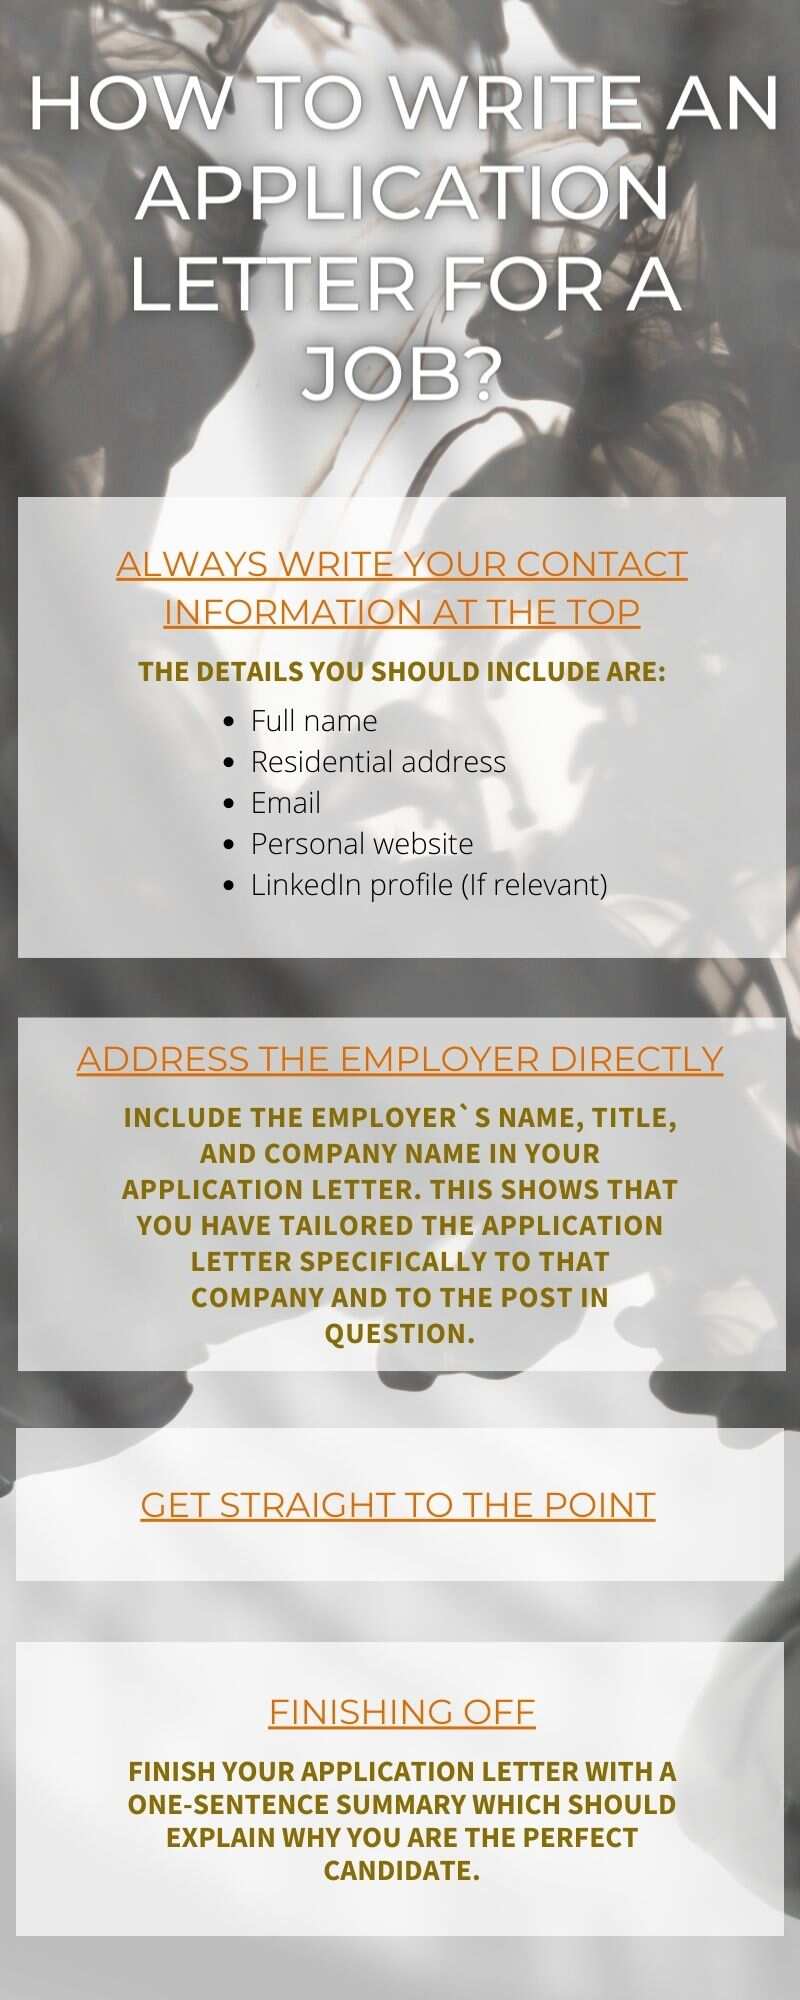 How to write an application letter for a job? (13 guide) ▷ Legit.ng